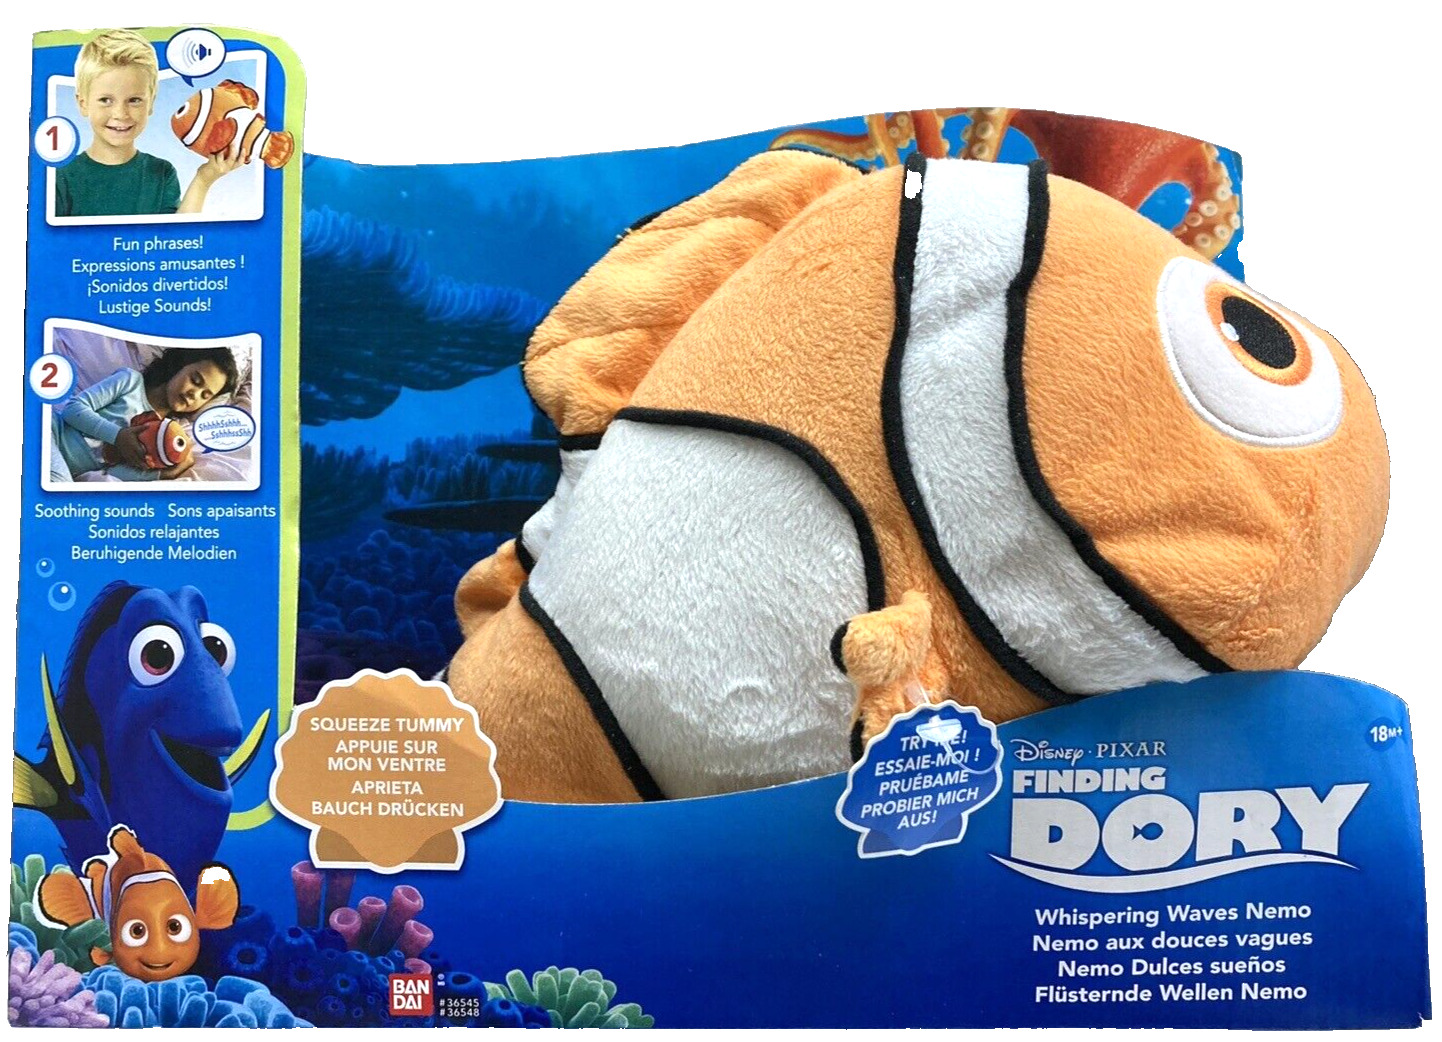 DISNEY PIXAR FINDING DORY WHISPERING WAVES NEMO W/FUN PHRASES & SOOTHING SOUNDS